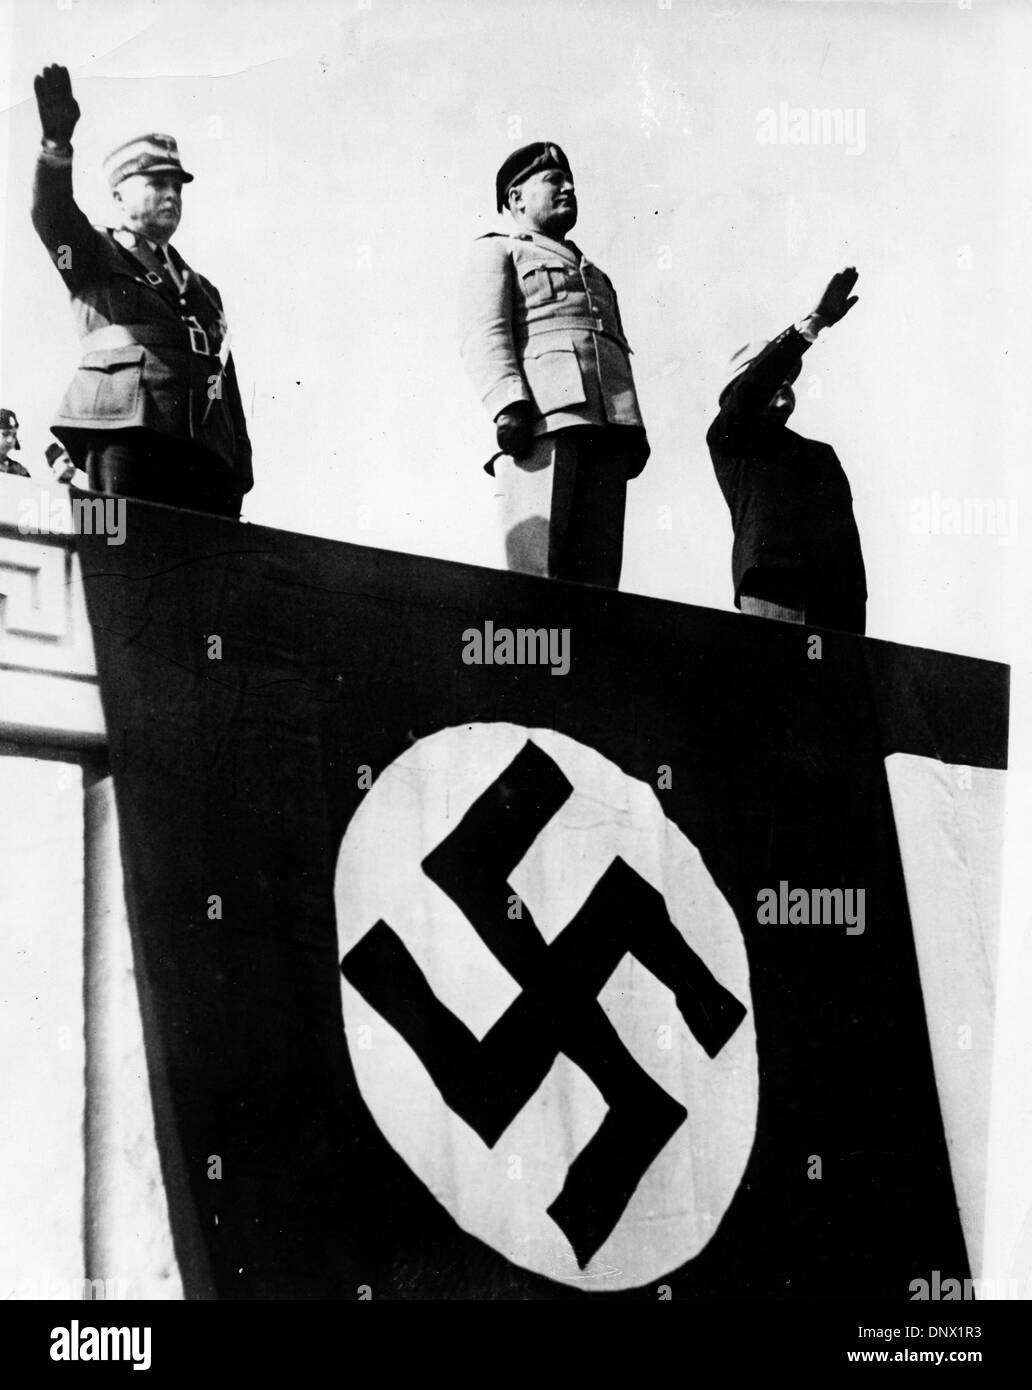 Jan. 10, 1933 - Rome, Italy - BENITO MUSSOLINI (1883-1945) the Italian dictator and leader of the Fascist movement standing on a balcony during an event. (Credit Image: © KEYSTONE Pictures USA/ZUMAPRESS.com) Stock Photo